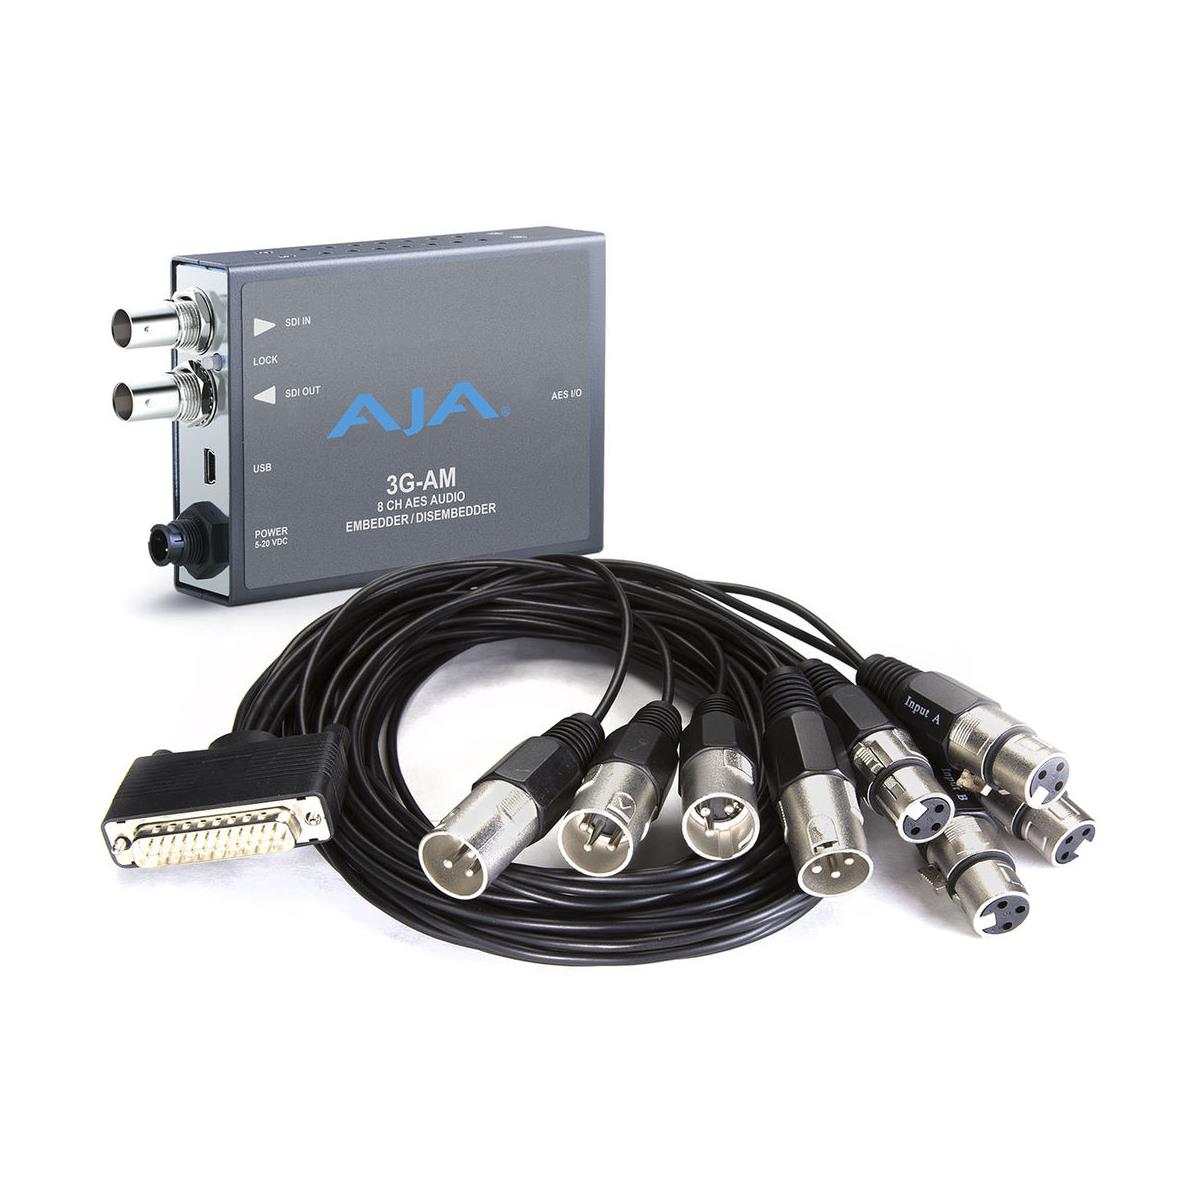 Image of AJA 3G-AM-XLR 3G-SDI 8-Channel AES Embedder/Disembedder with XLR Breakout Cable